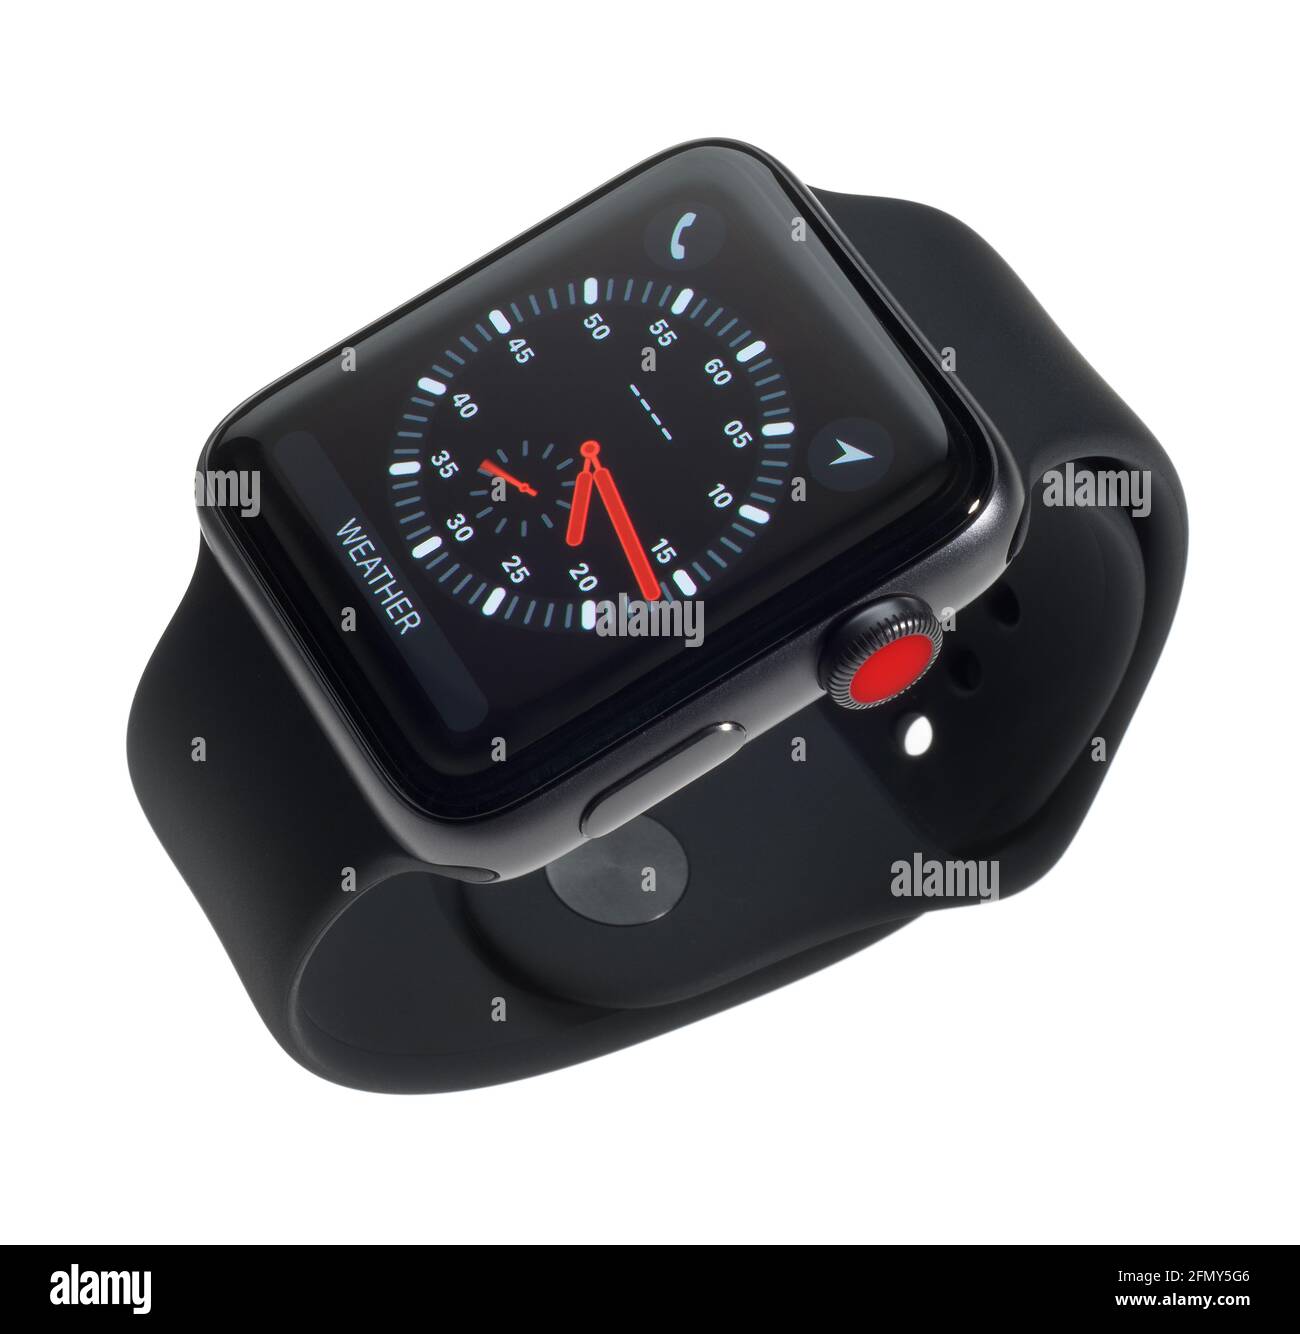 Series 3 Apple watch with GPS and cellular connection. Stock Photo